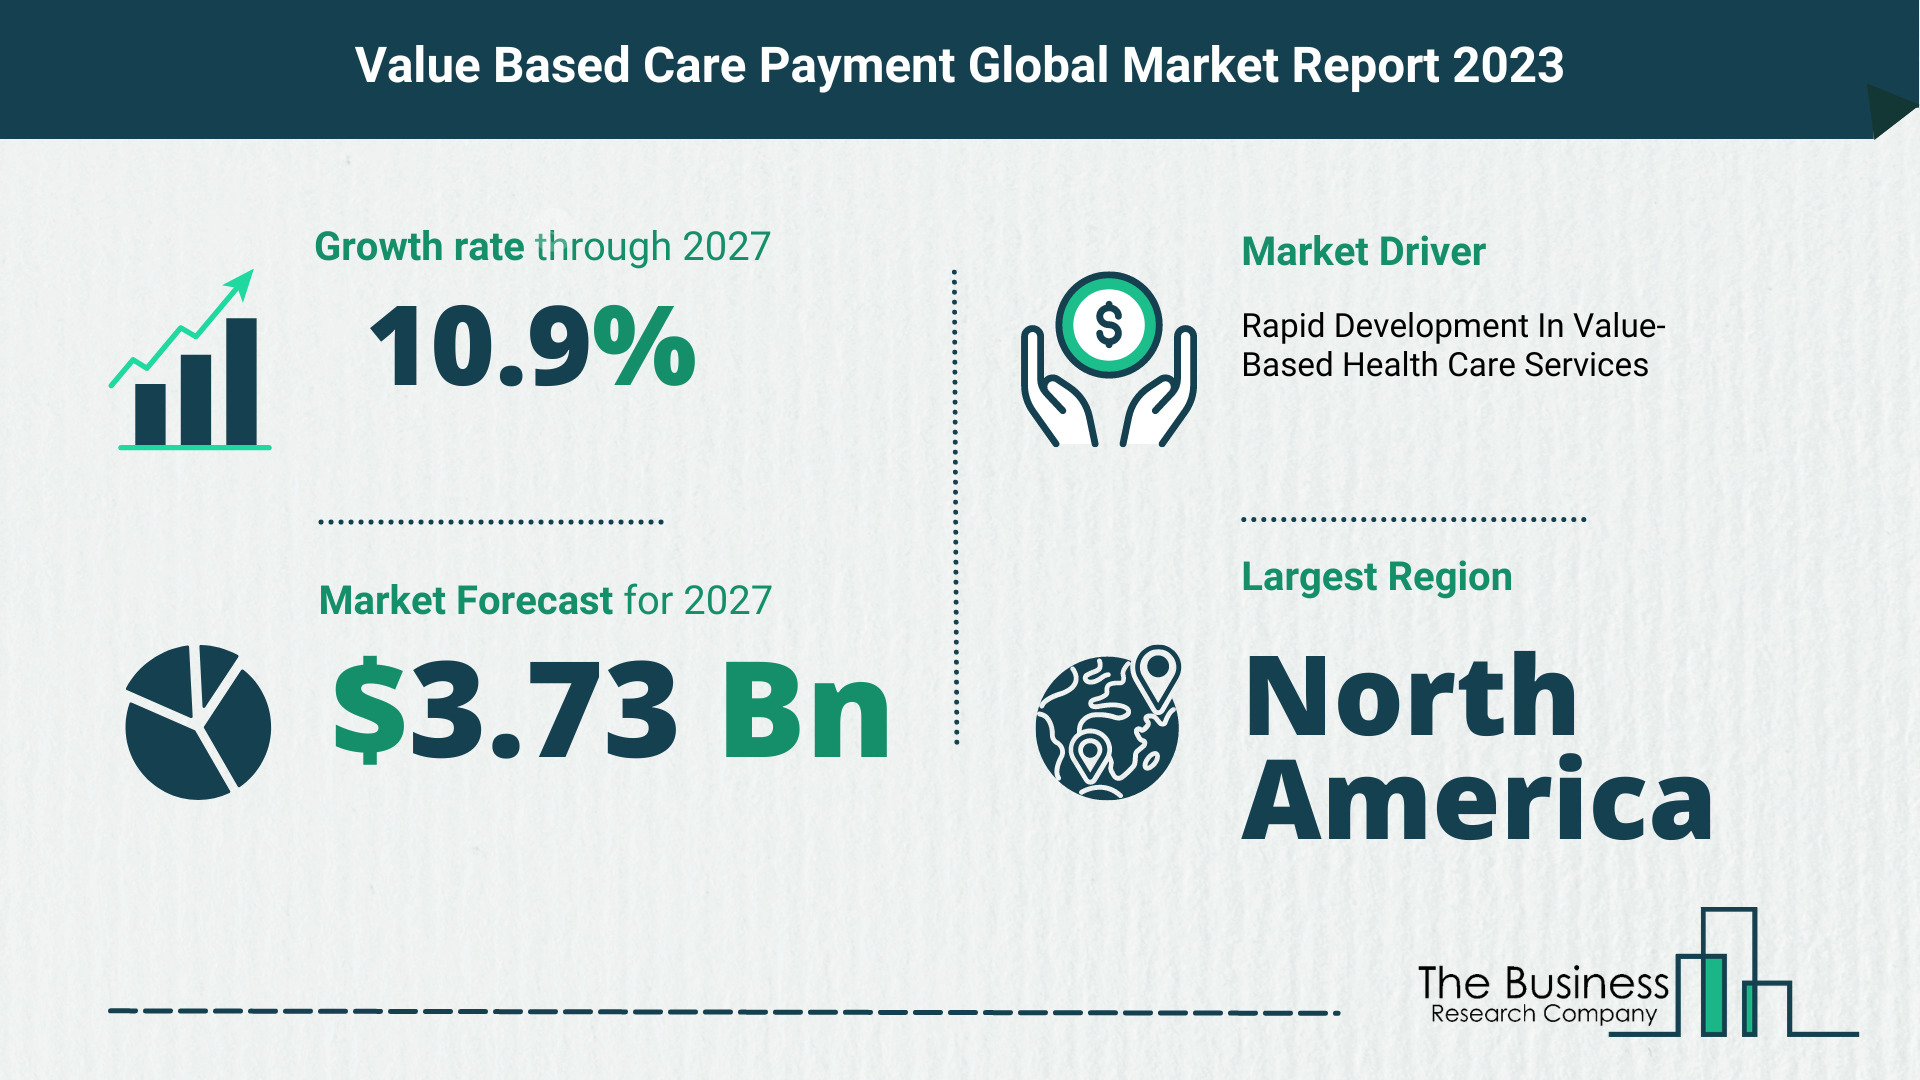 Global Value Based Care Payment Market Opportunities And Strategies 2023